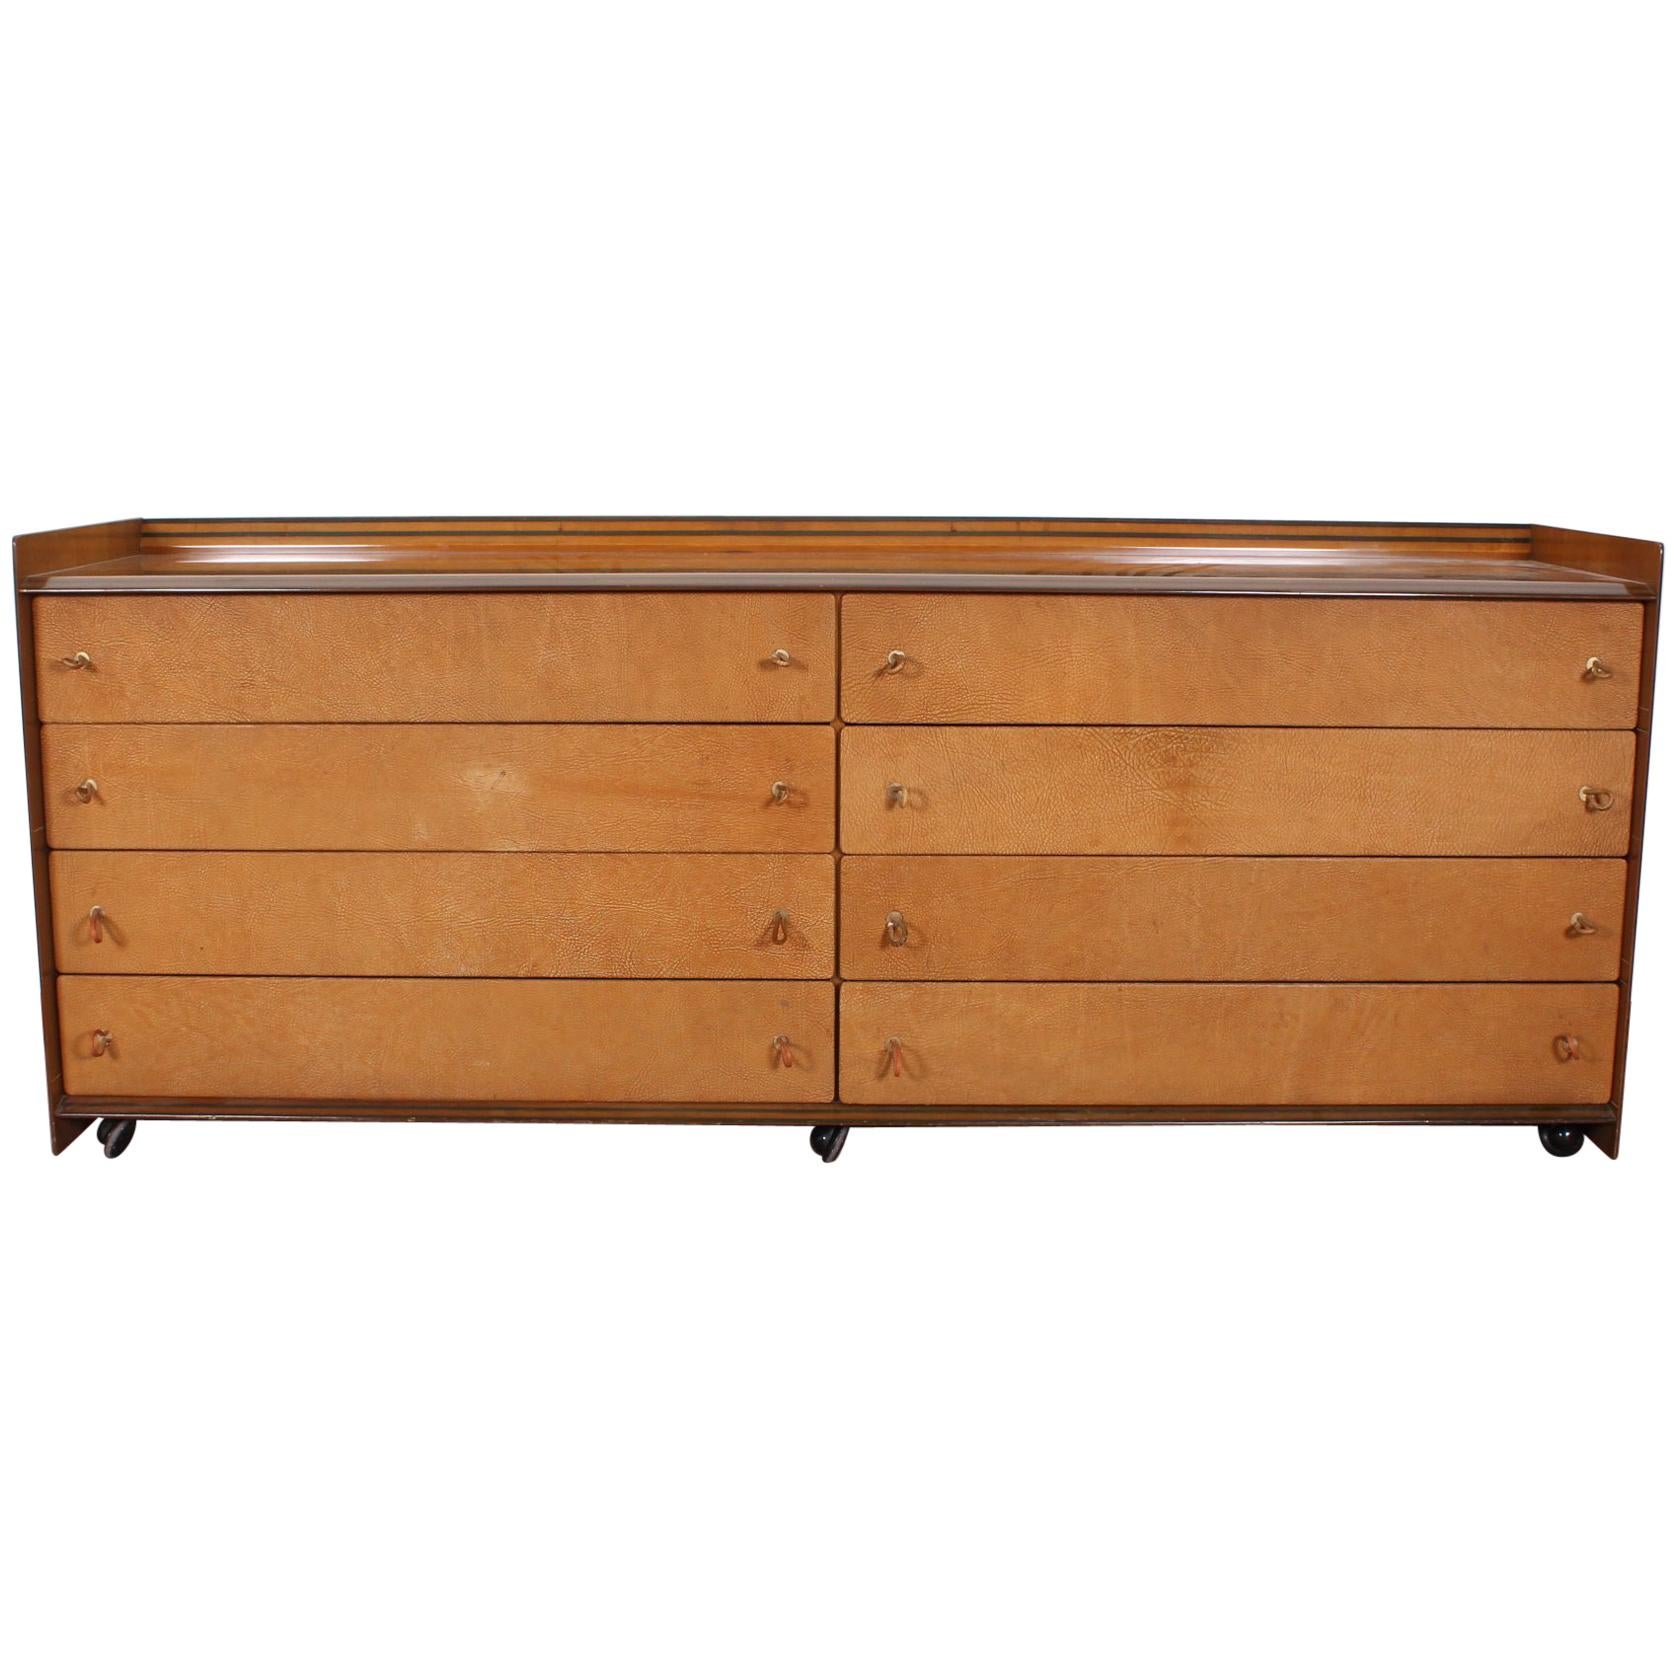 20th Century Modern Design Walnut and Leather Drawer Cabinet